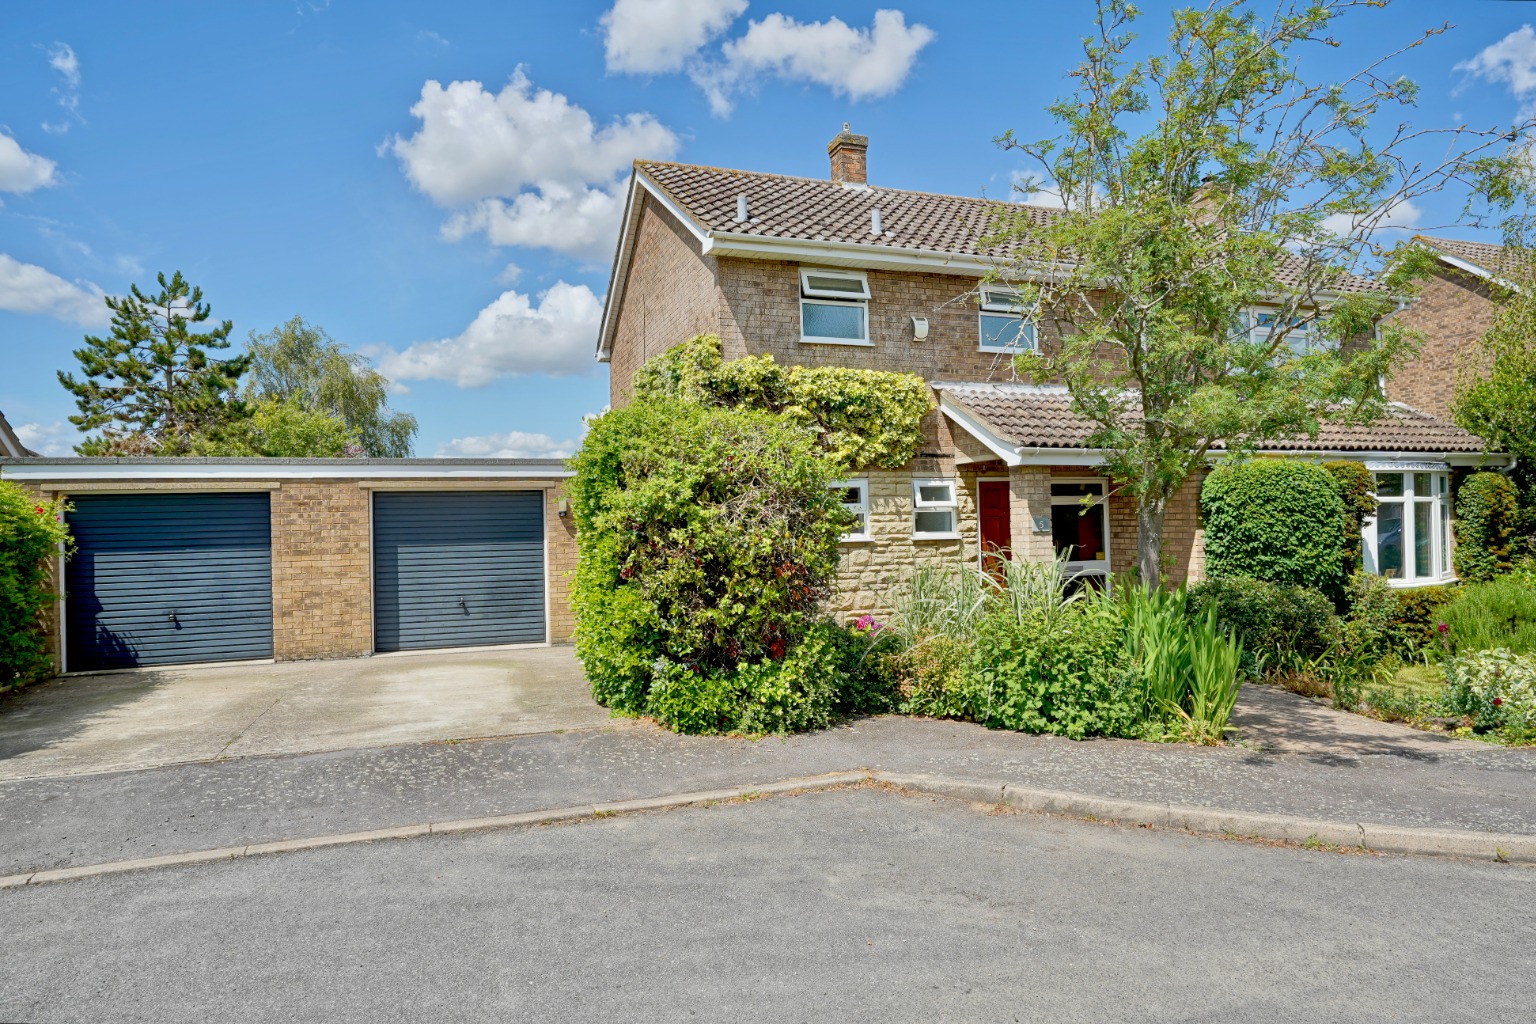 4 bed detached house for sale in Chapel Close, Huntingdon  - Property Image 1